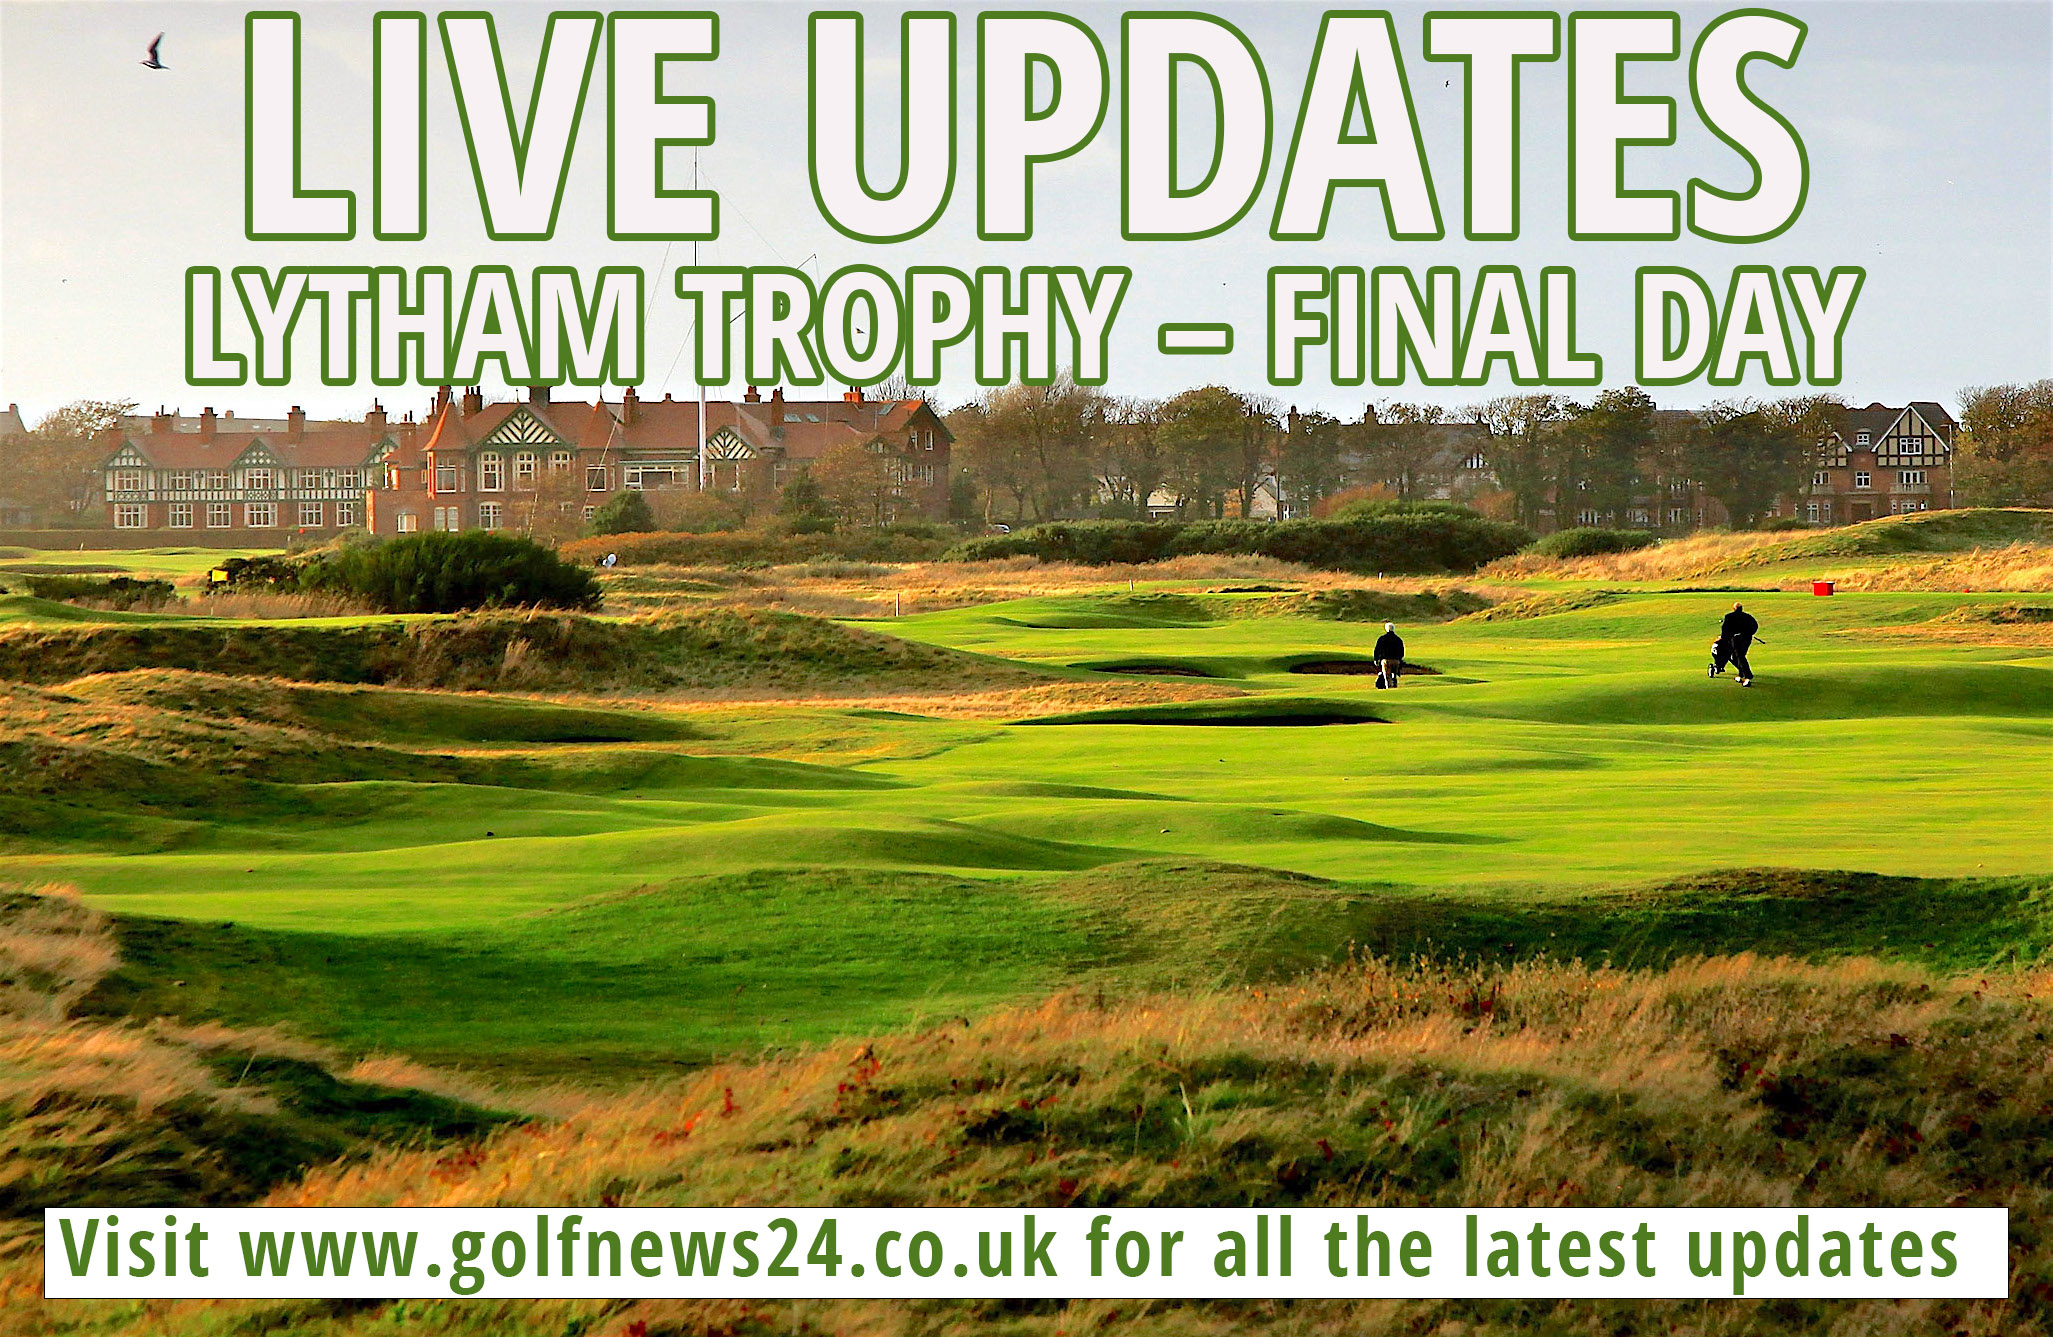 The Lytham Trophy final day live